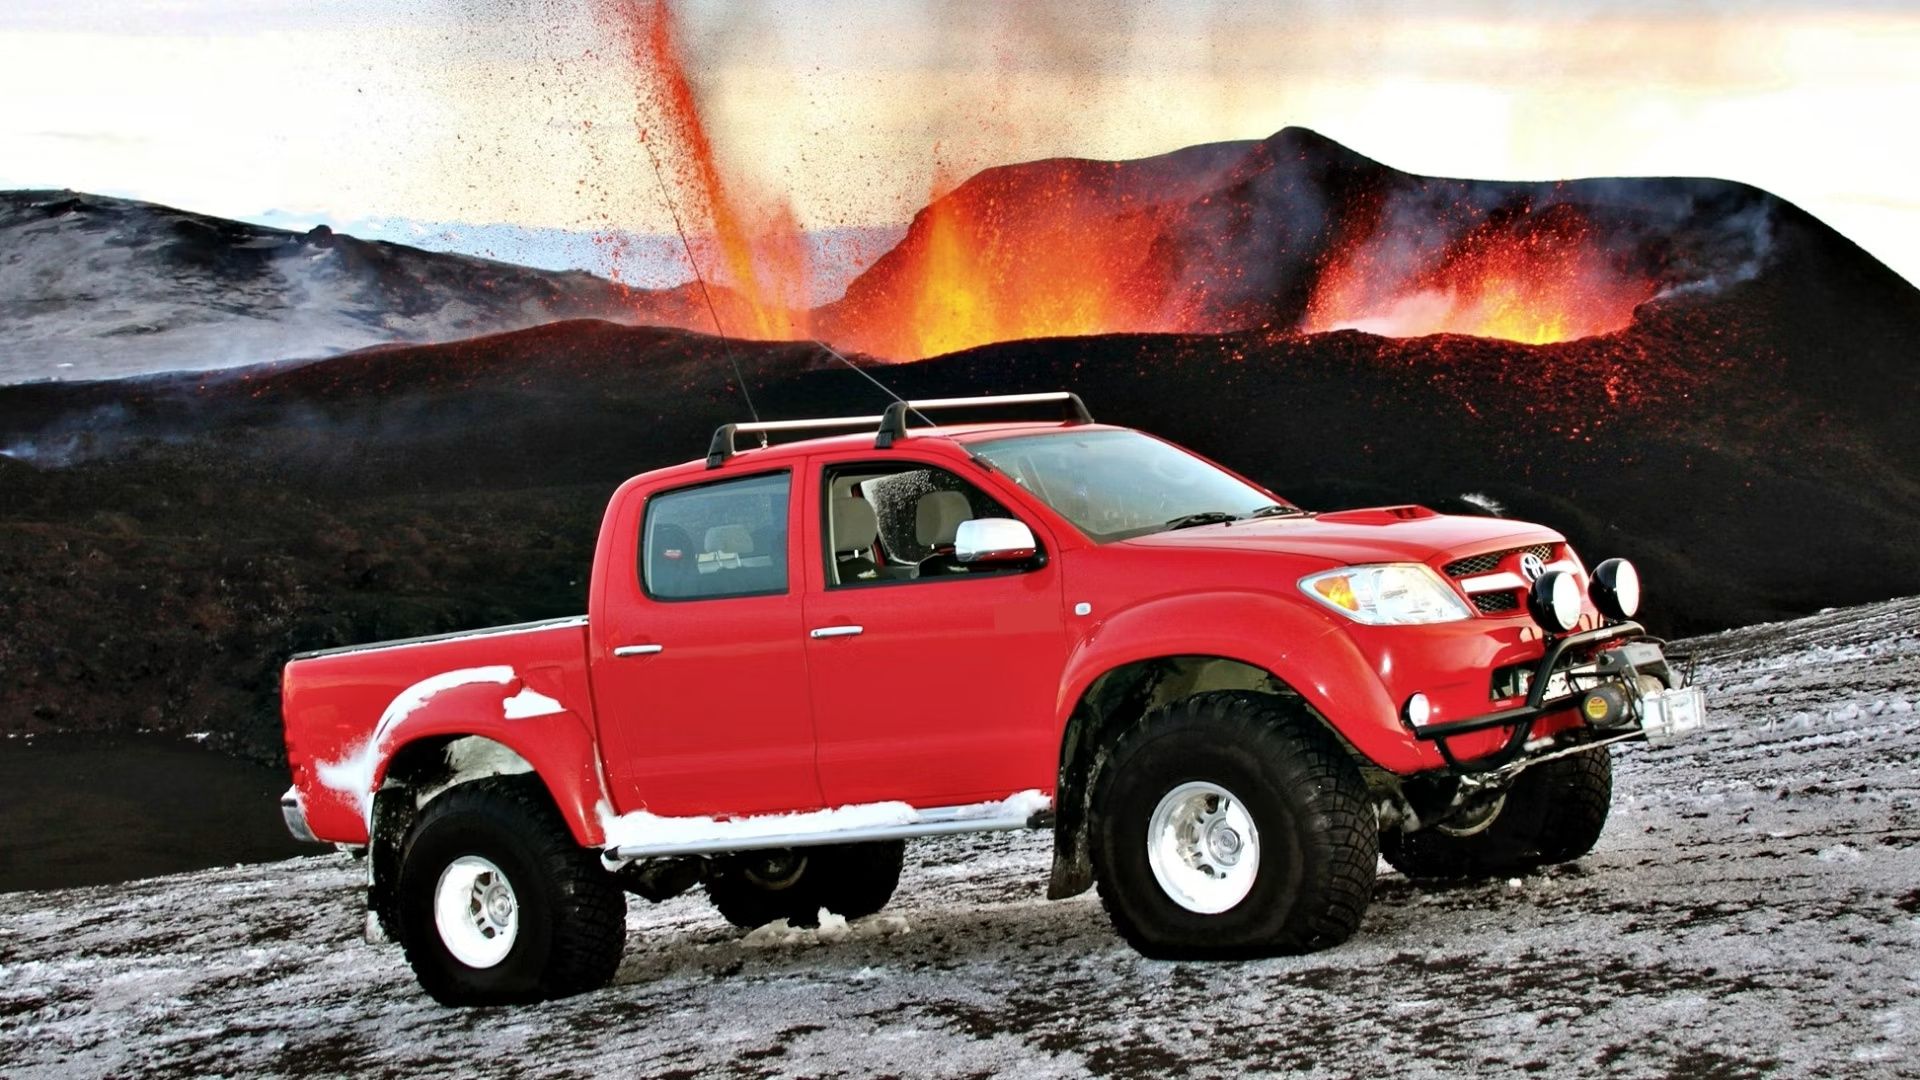 Return of The King! Next-Generation 2025 Toyota Hilux Pickup truck🔥 